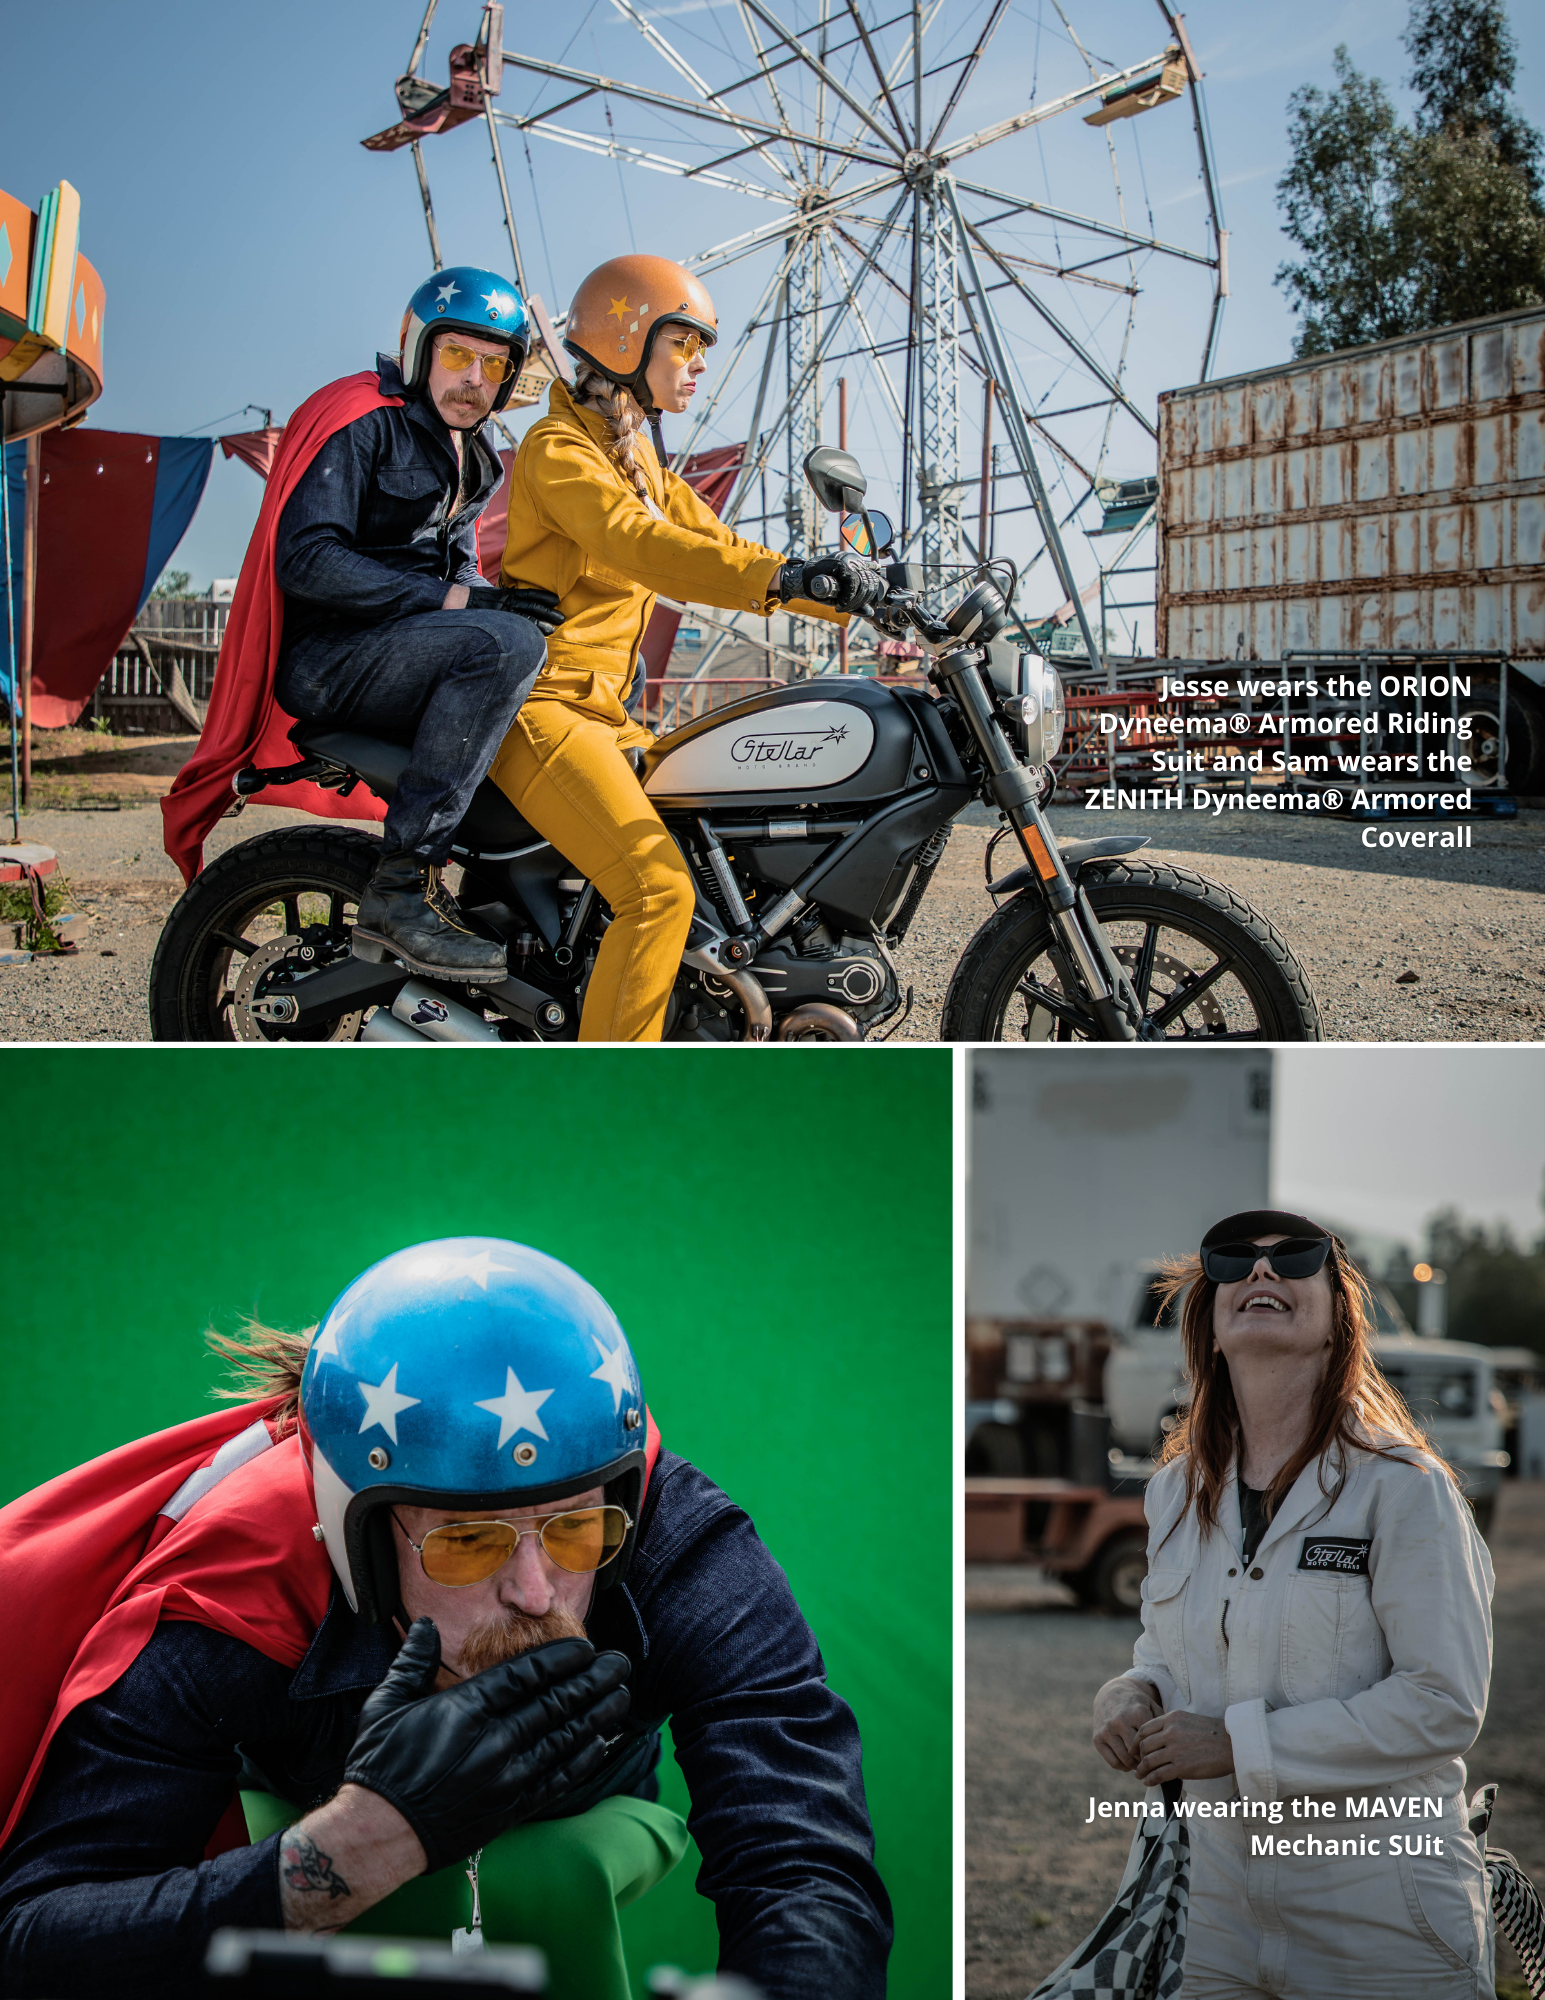 Jesse wears the ORION Dyneema® Armored Riding Suit and Sam wears the ZENITH Dyneema® Armored Coverall